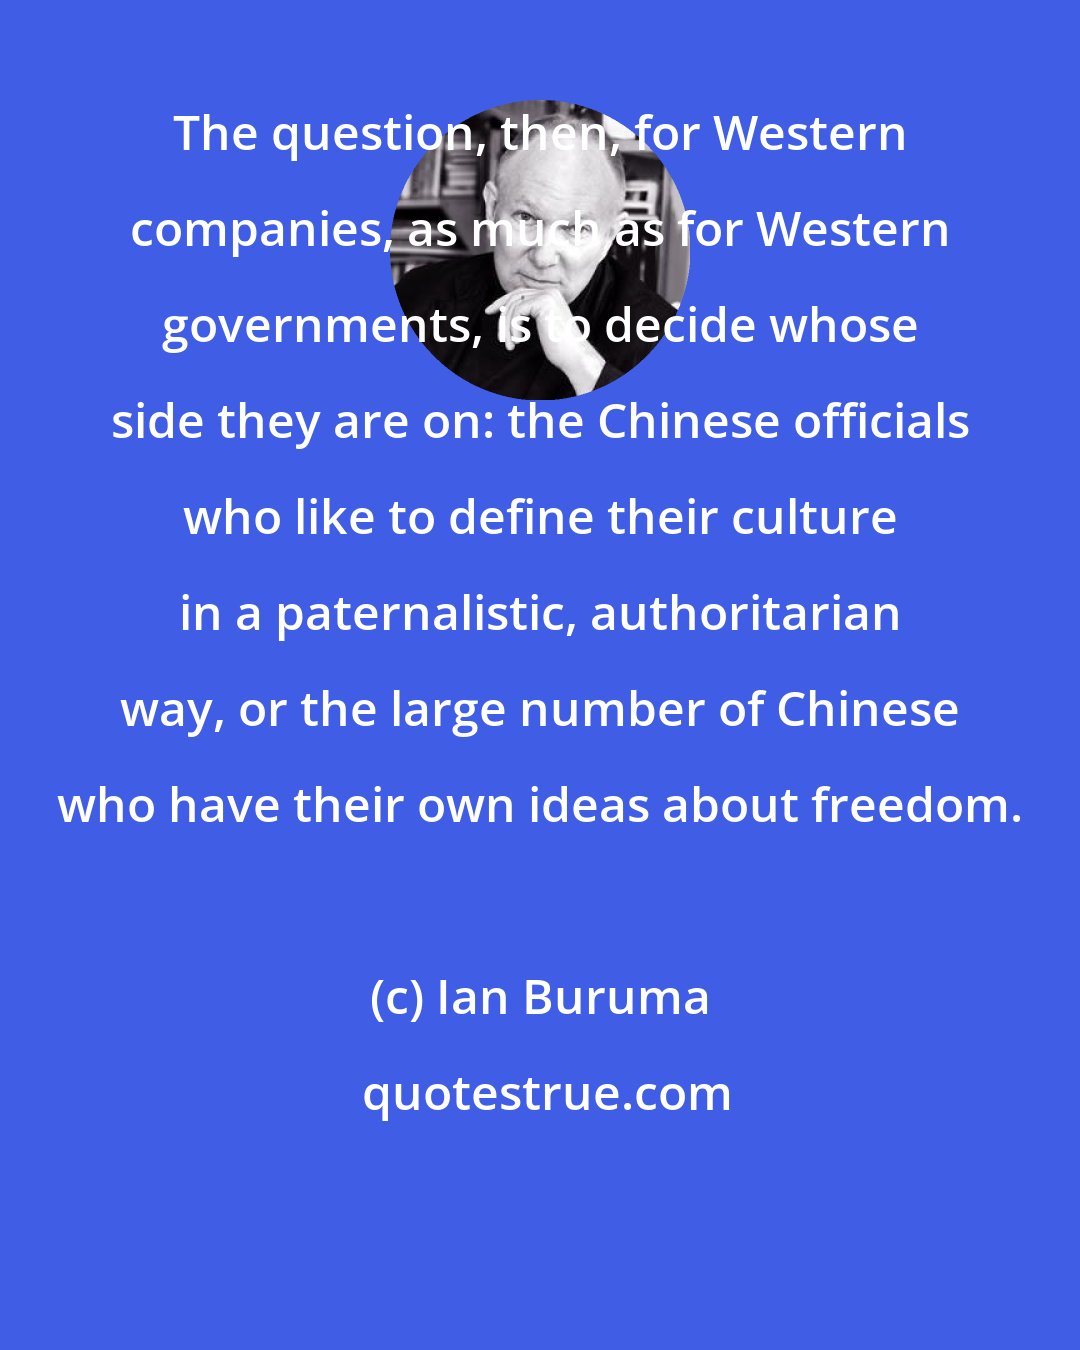 Ian Buruma: The question, then, for Western companies, as much as for Western governments, is to decide whose side they are on: the Chinese officials who like to define their culture in a paternalistic, authoritarian way, or the large number of Chinese who have their own ideas about freedom.